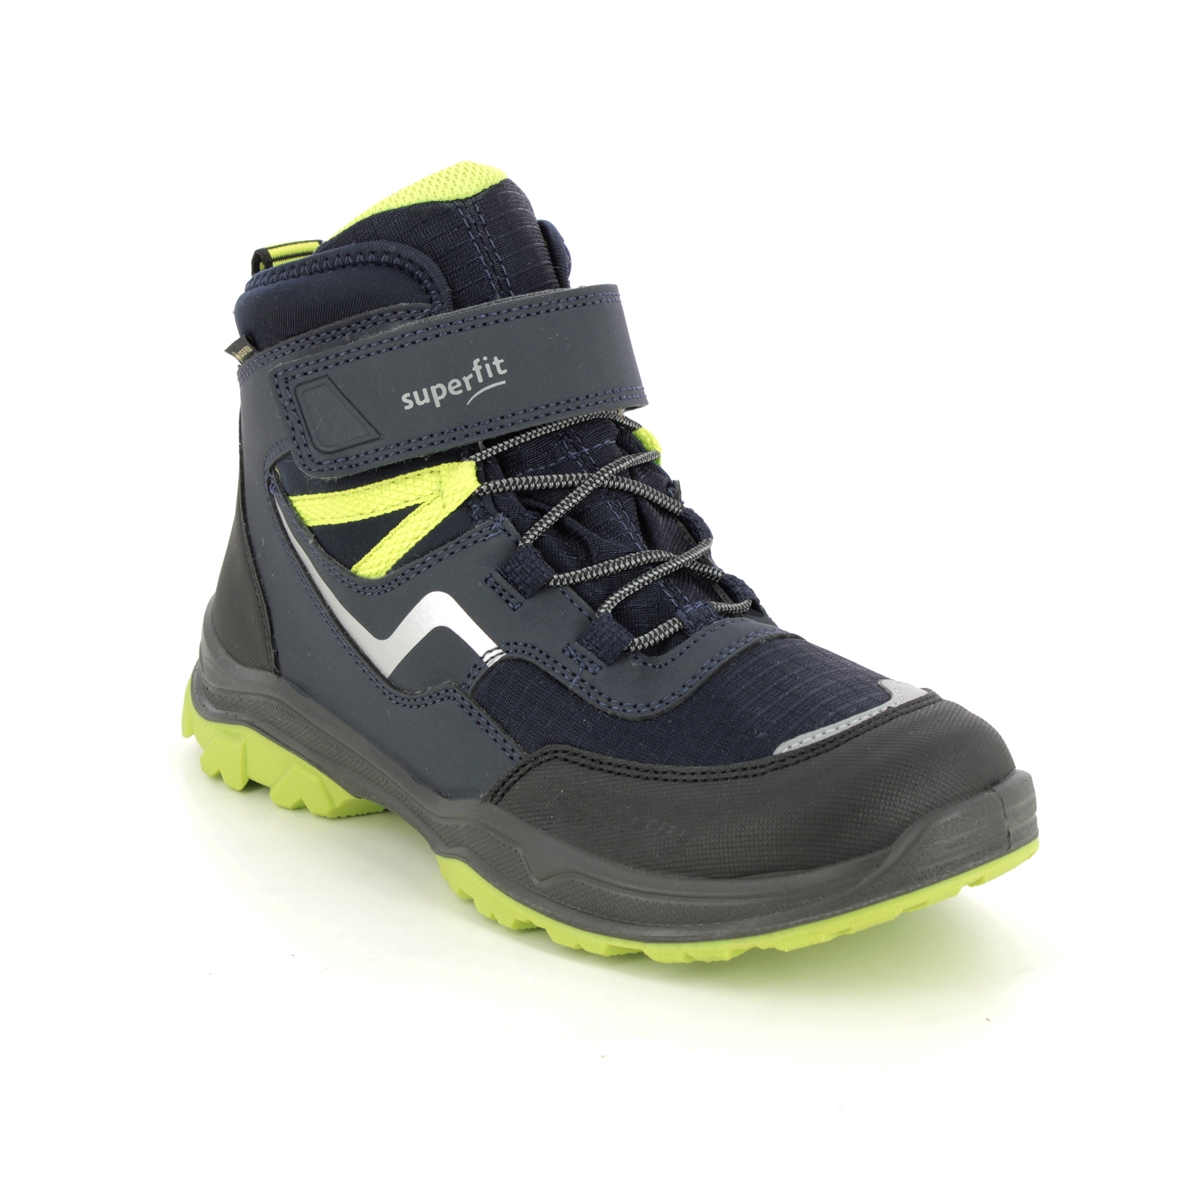 Superfit Jupiter Bungee Gtx Navy Lime Kids Boys Boots 1000074-8000 In Size 37 In Plain Navy Lime For kids